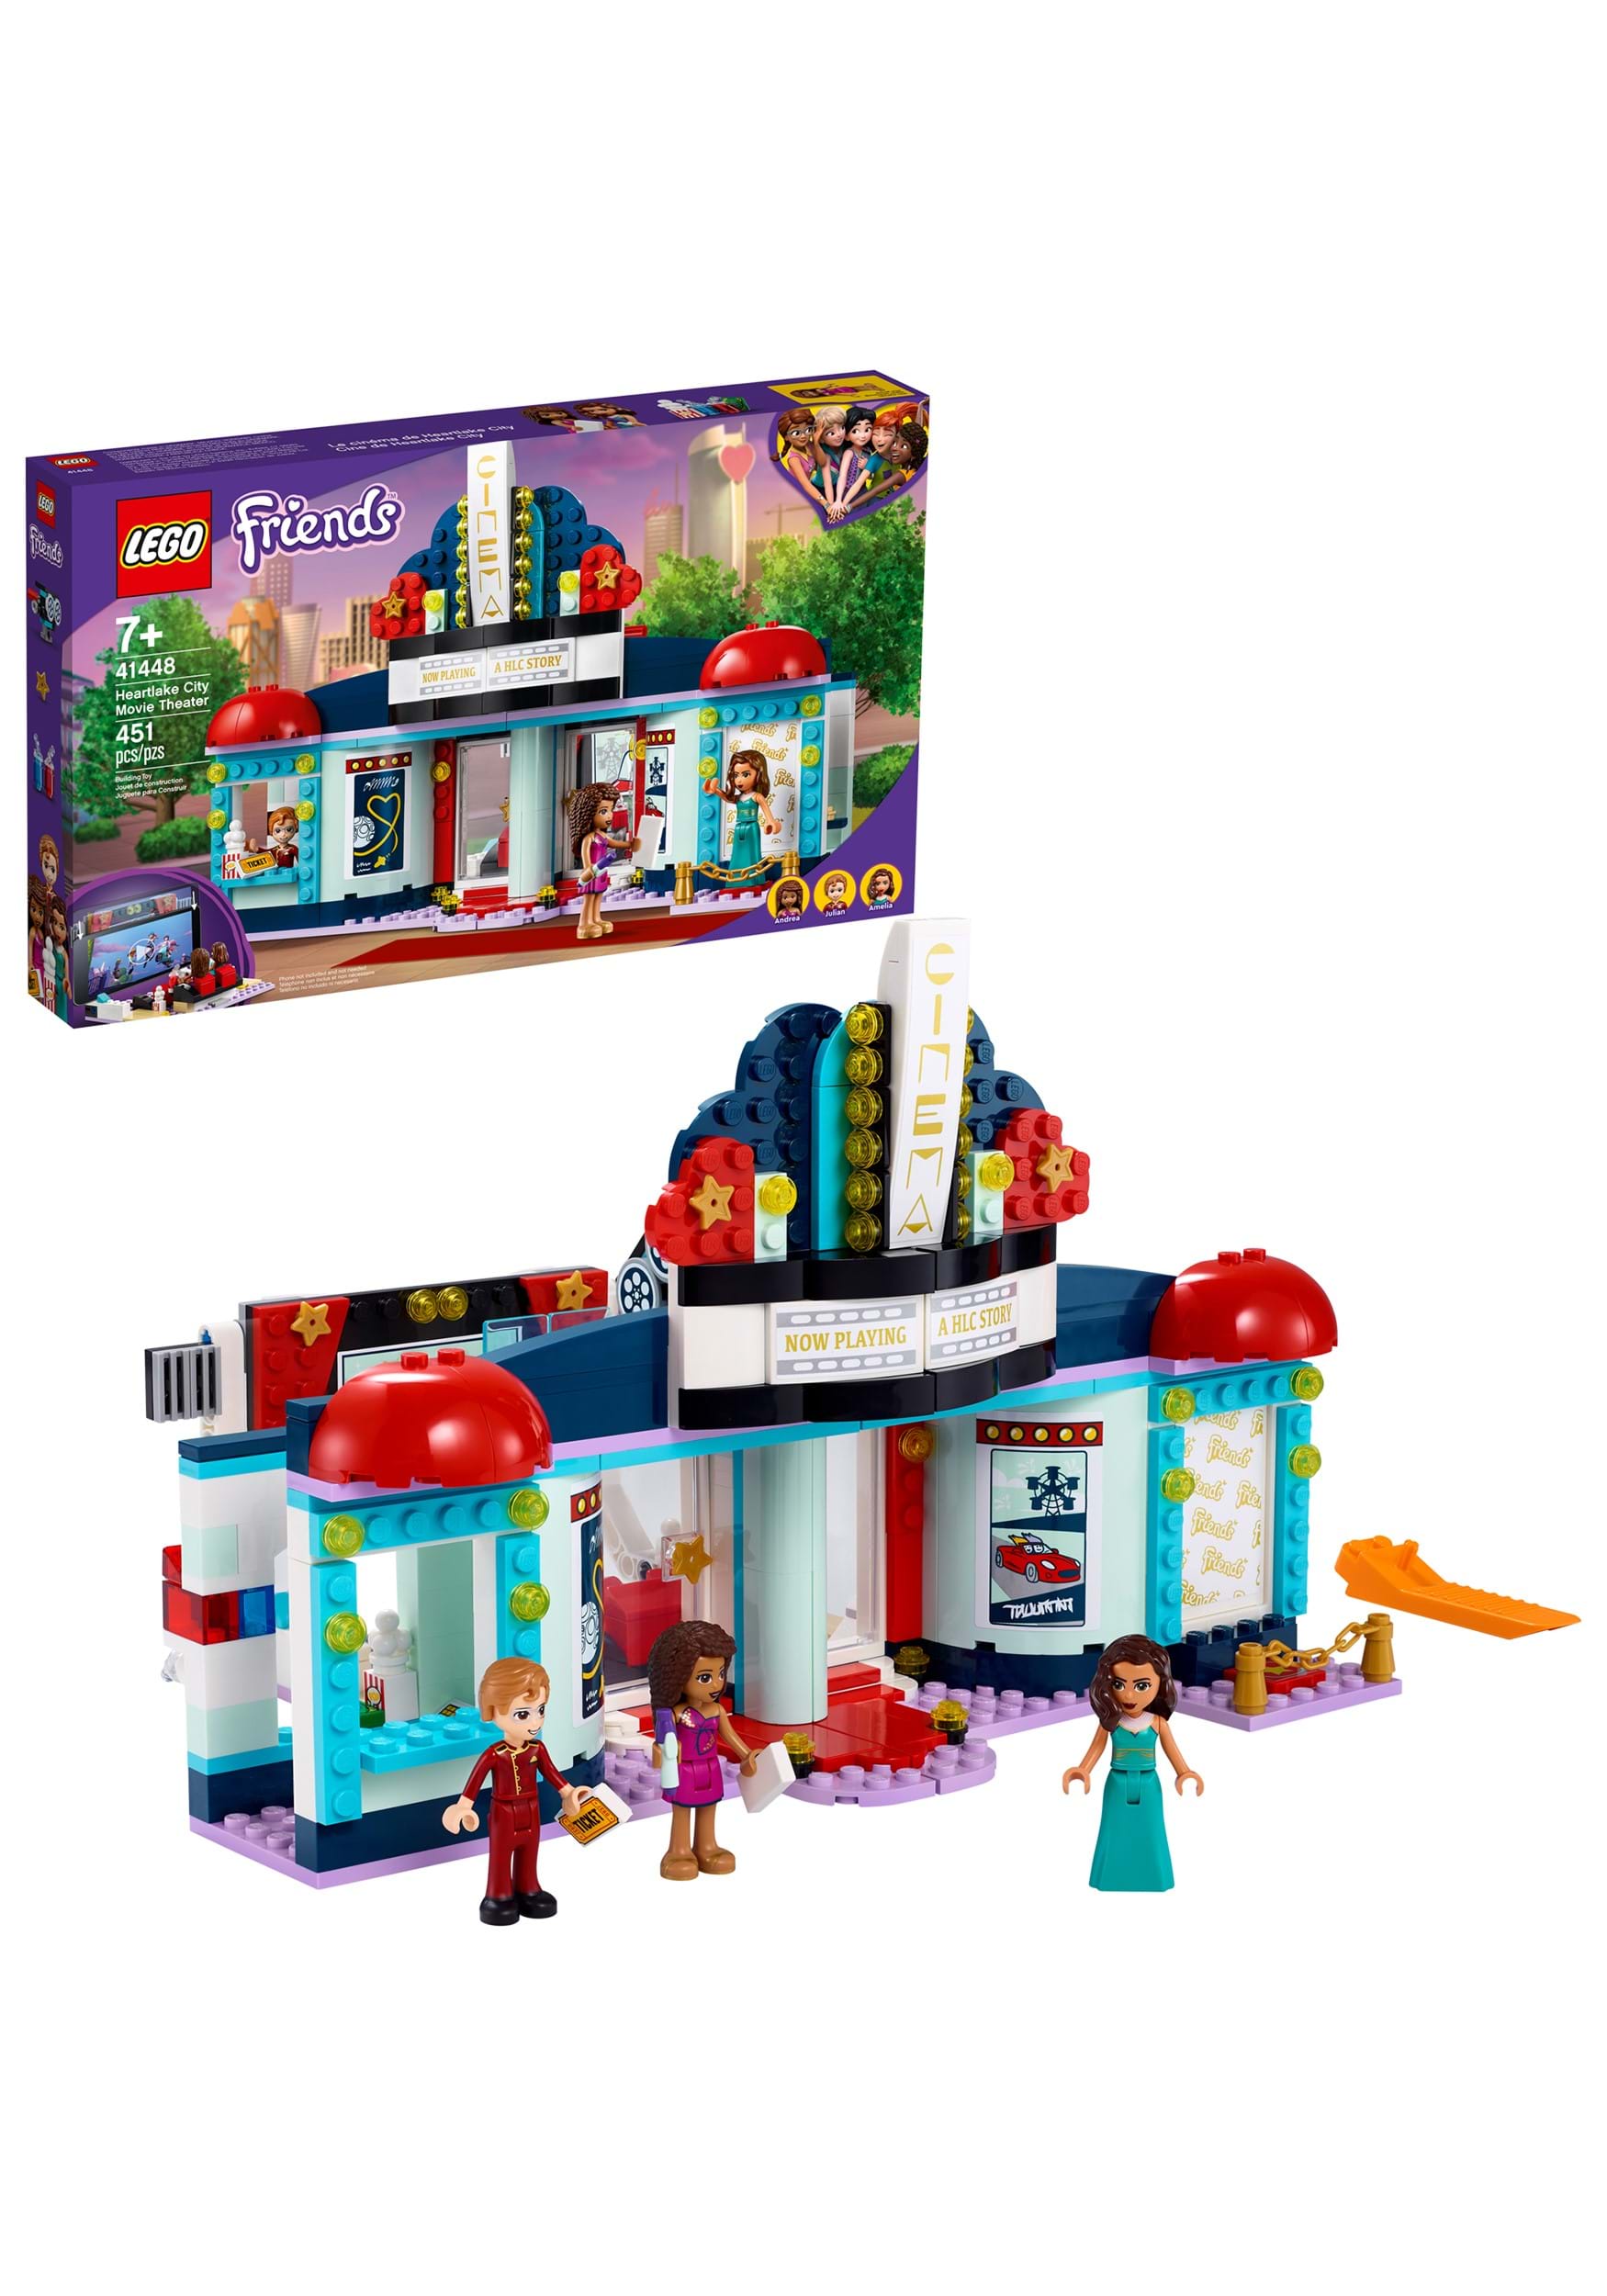 Friends Heartlake City Movie Theater from LEGO